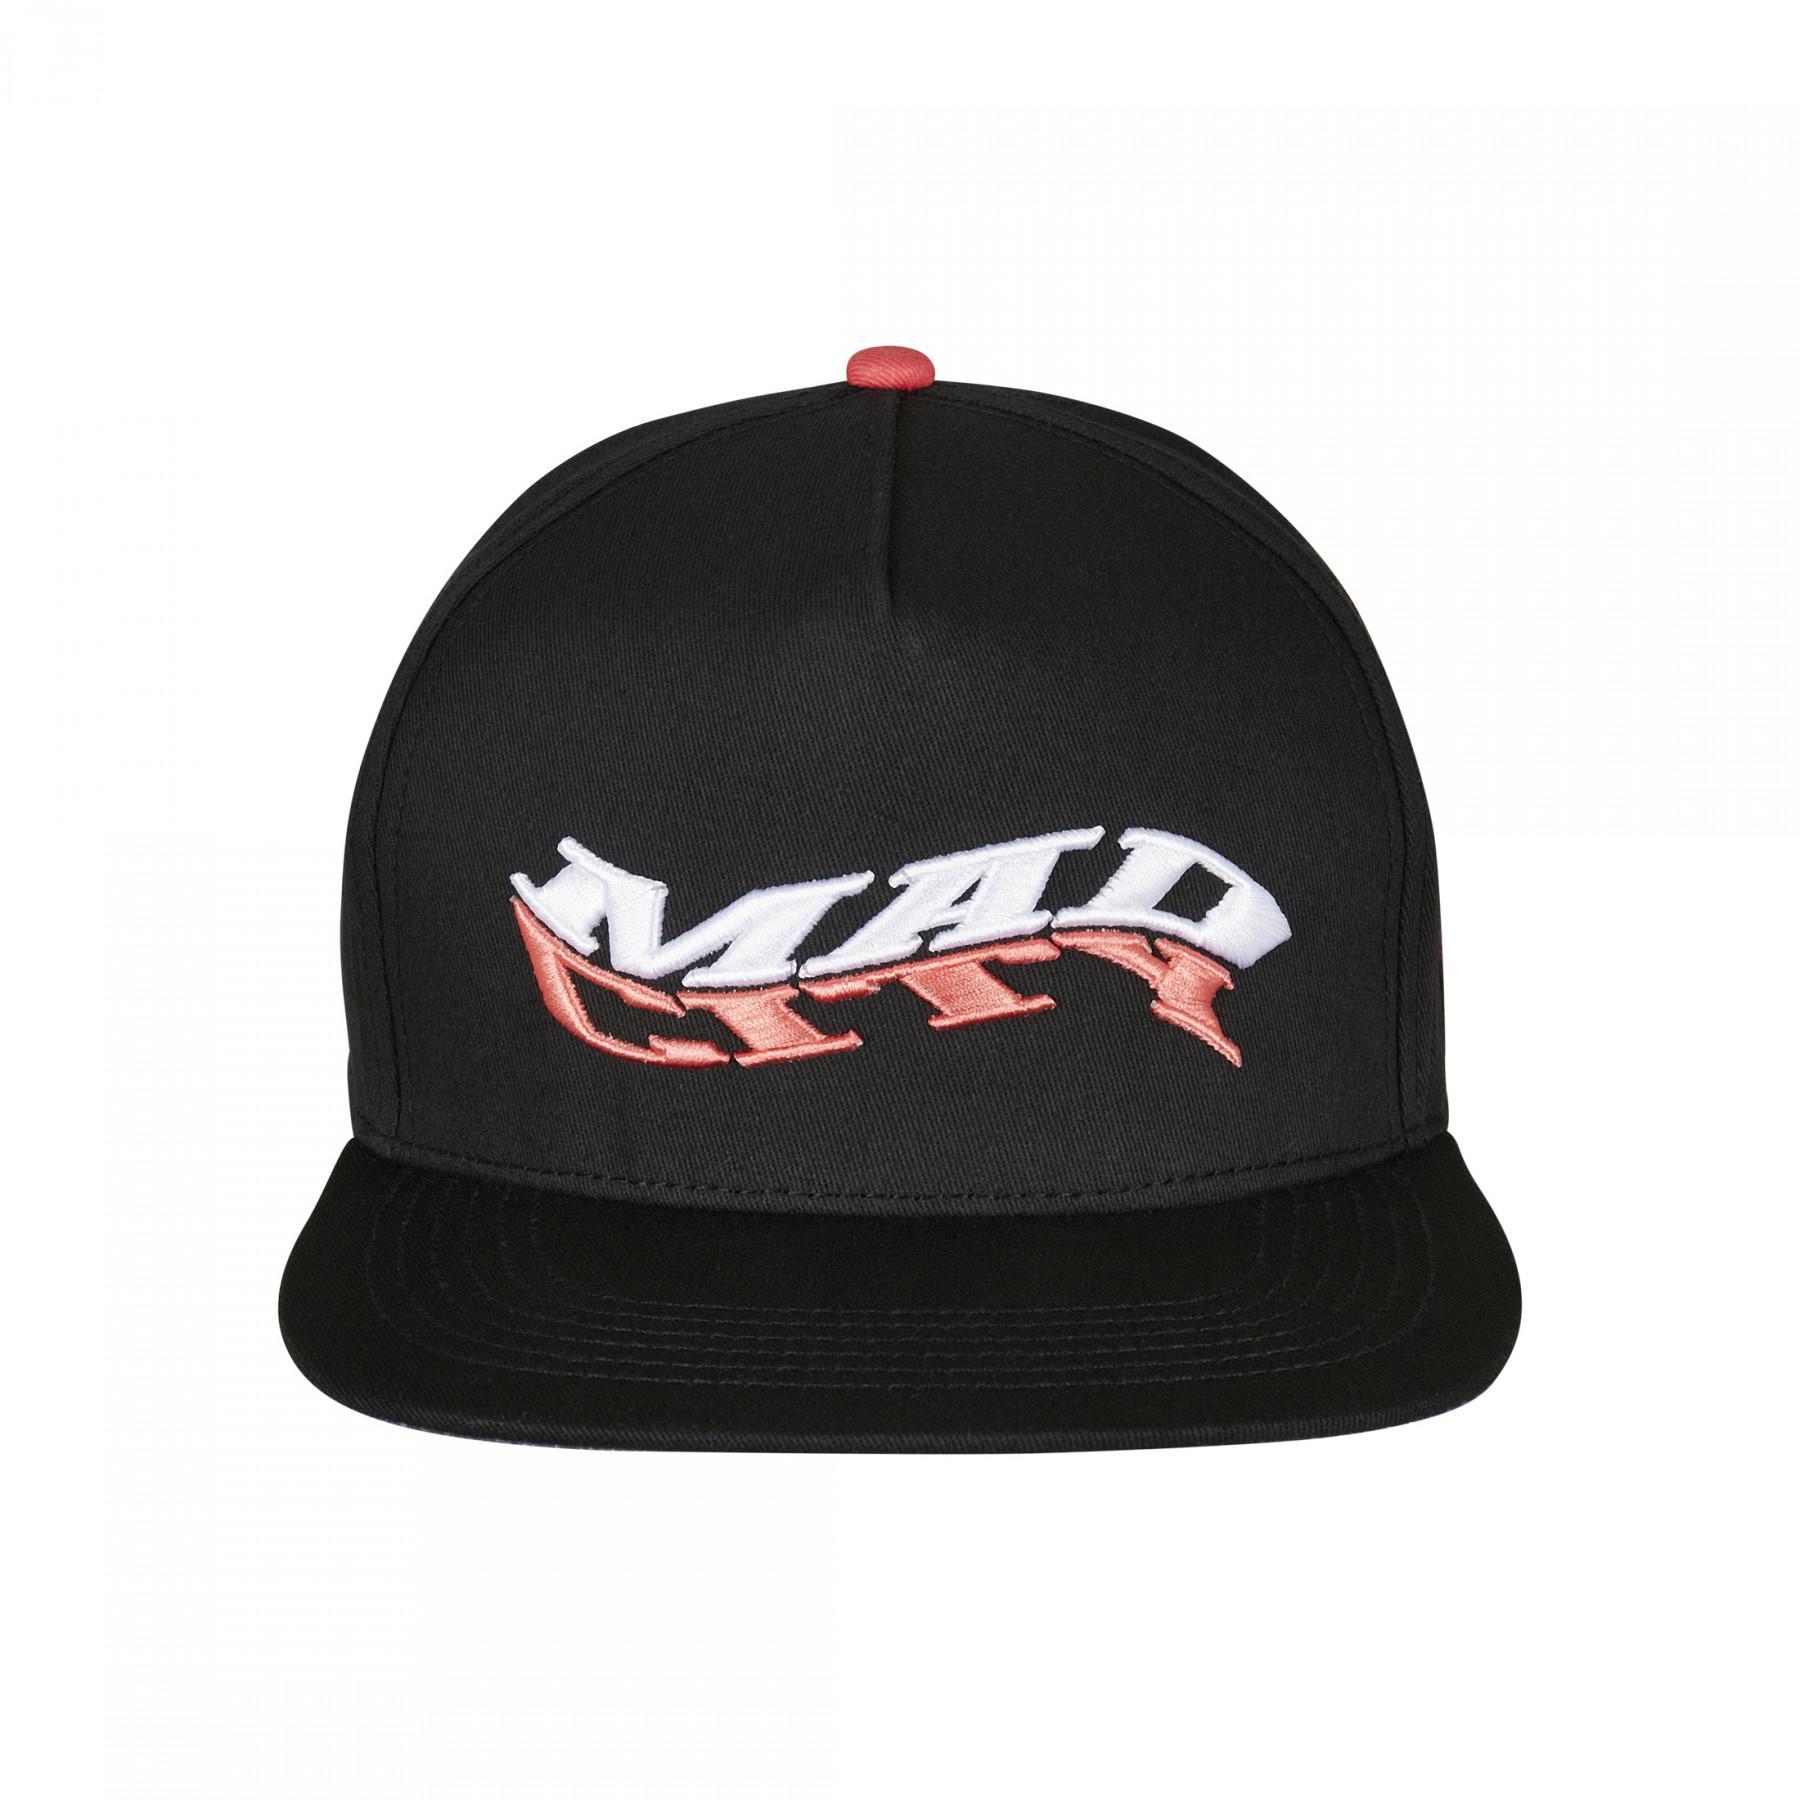 Casquette Cayler & Sons wl mad city